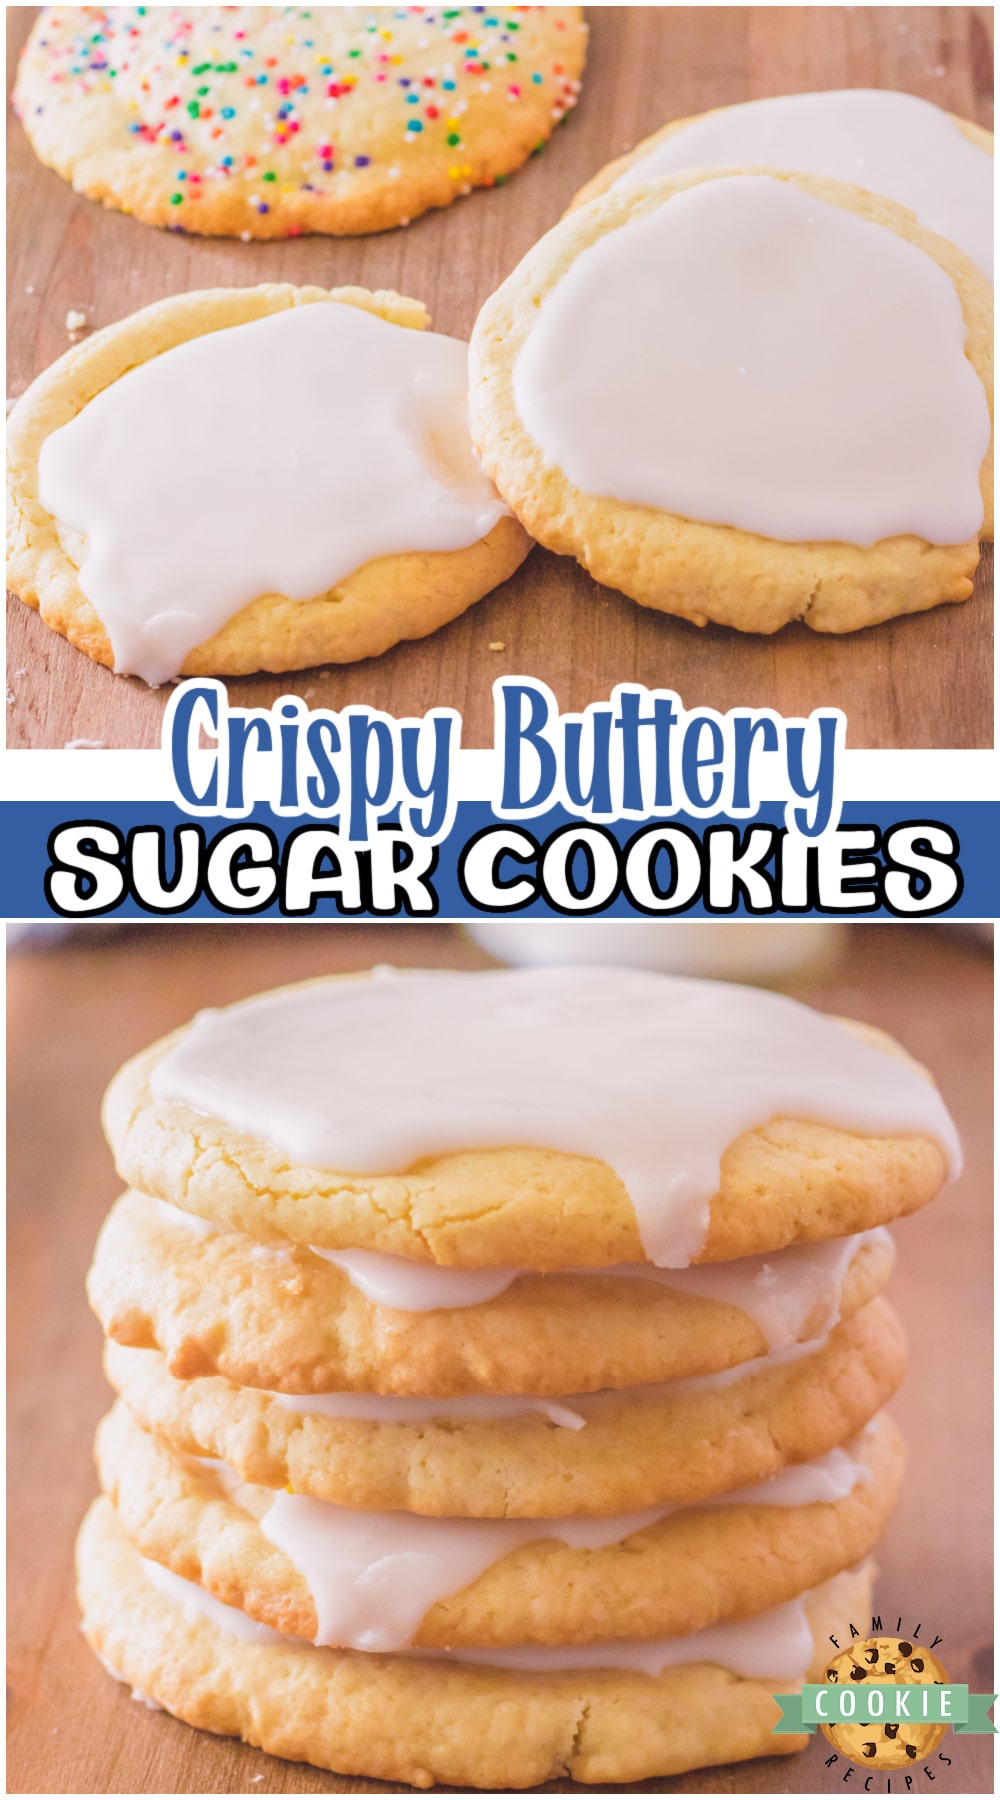 Crispy sugar cookies with lovely buttery crisp texture and flavor! Crisp cookies made from scratch with classic ingredients like butter, sugar & eggs, then baked to golden brown perfection! 